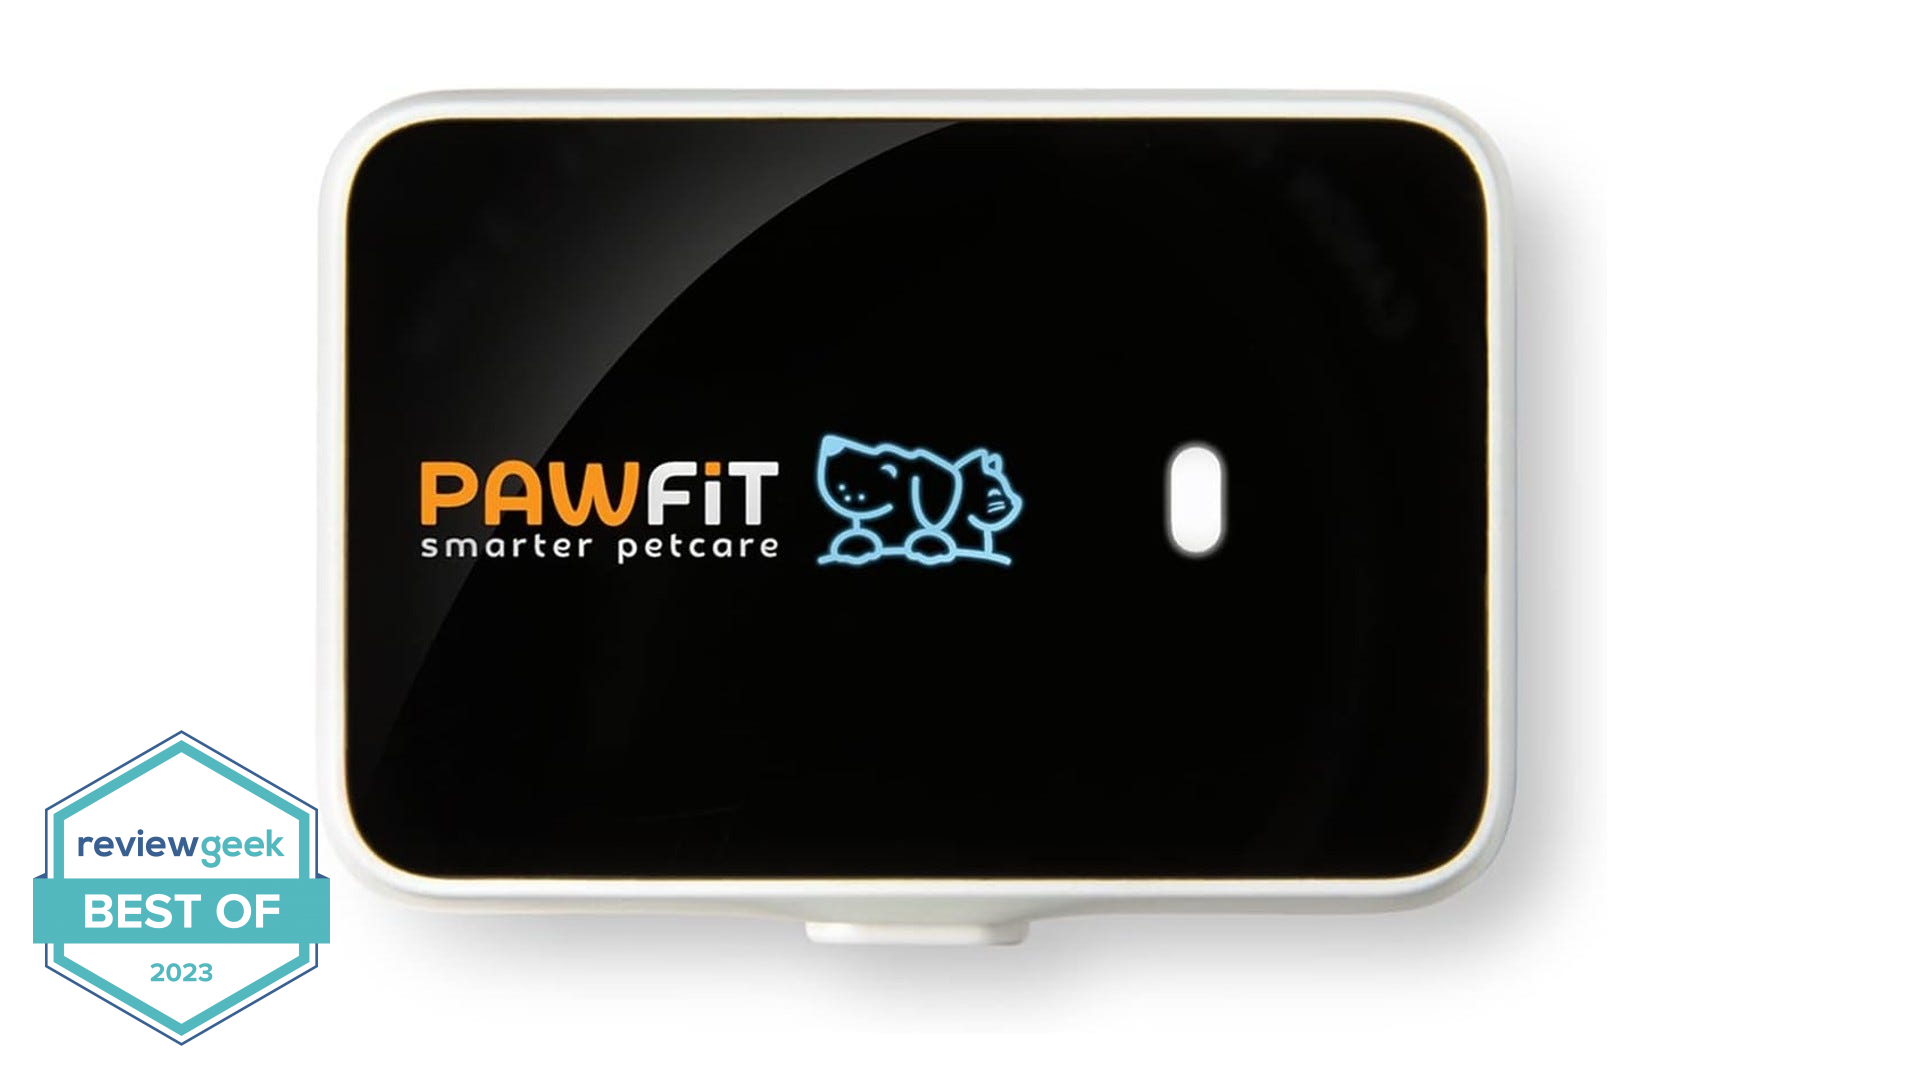 Pawfit 3s GPS Pet Tracker on a white background